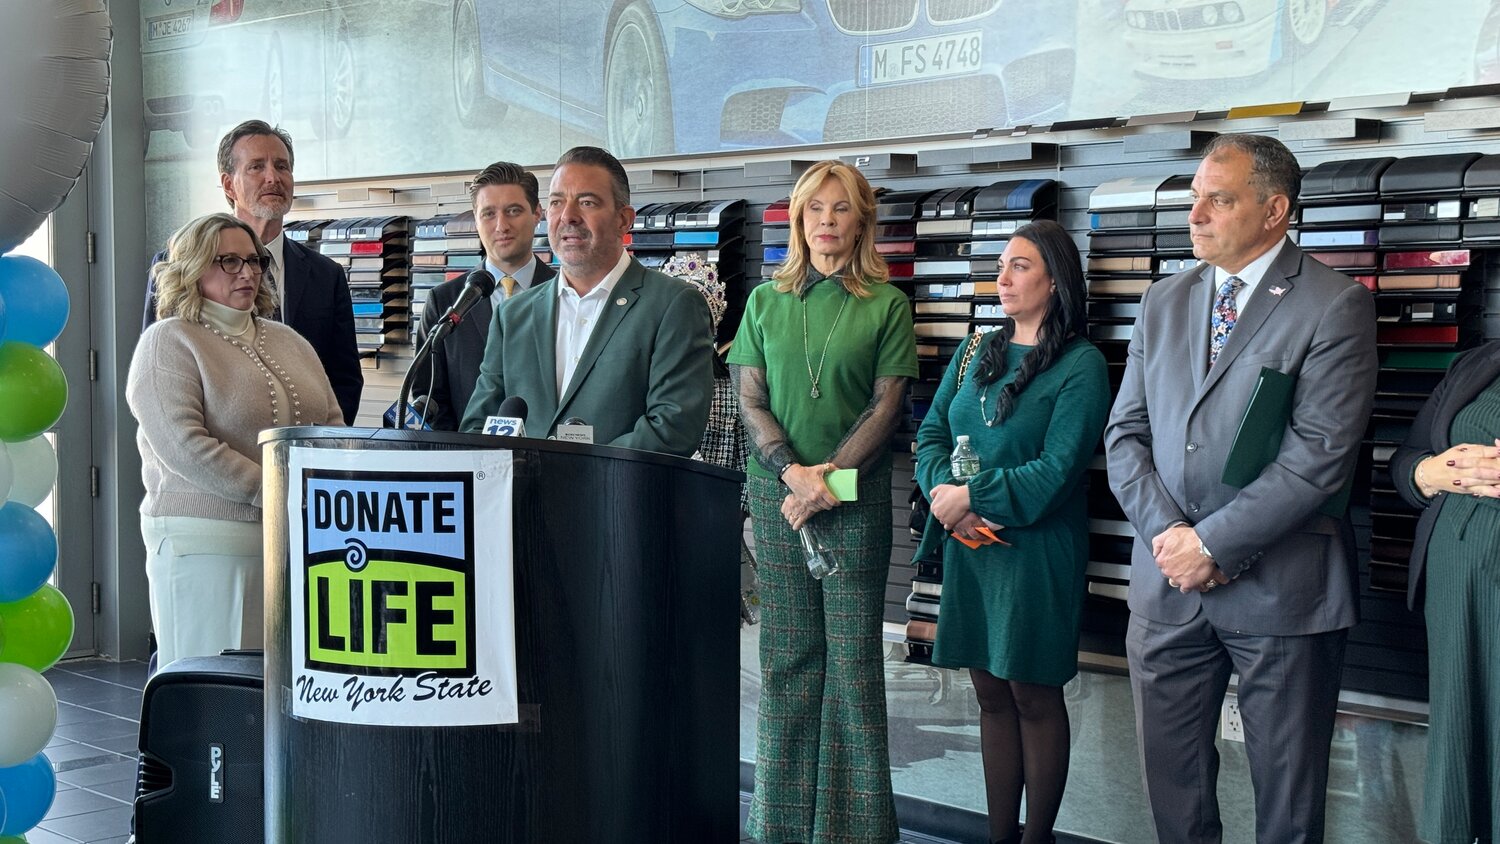 Matt Carlson, the general manager of Rallye BMW in Westbury, received a kidney from his daughter, Stephanie Trotti. Rallye Motor Company works closely with Donate Life New York State to raise awareness on the importance of becoming an organ donor.